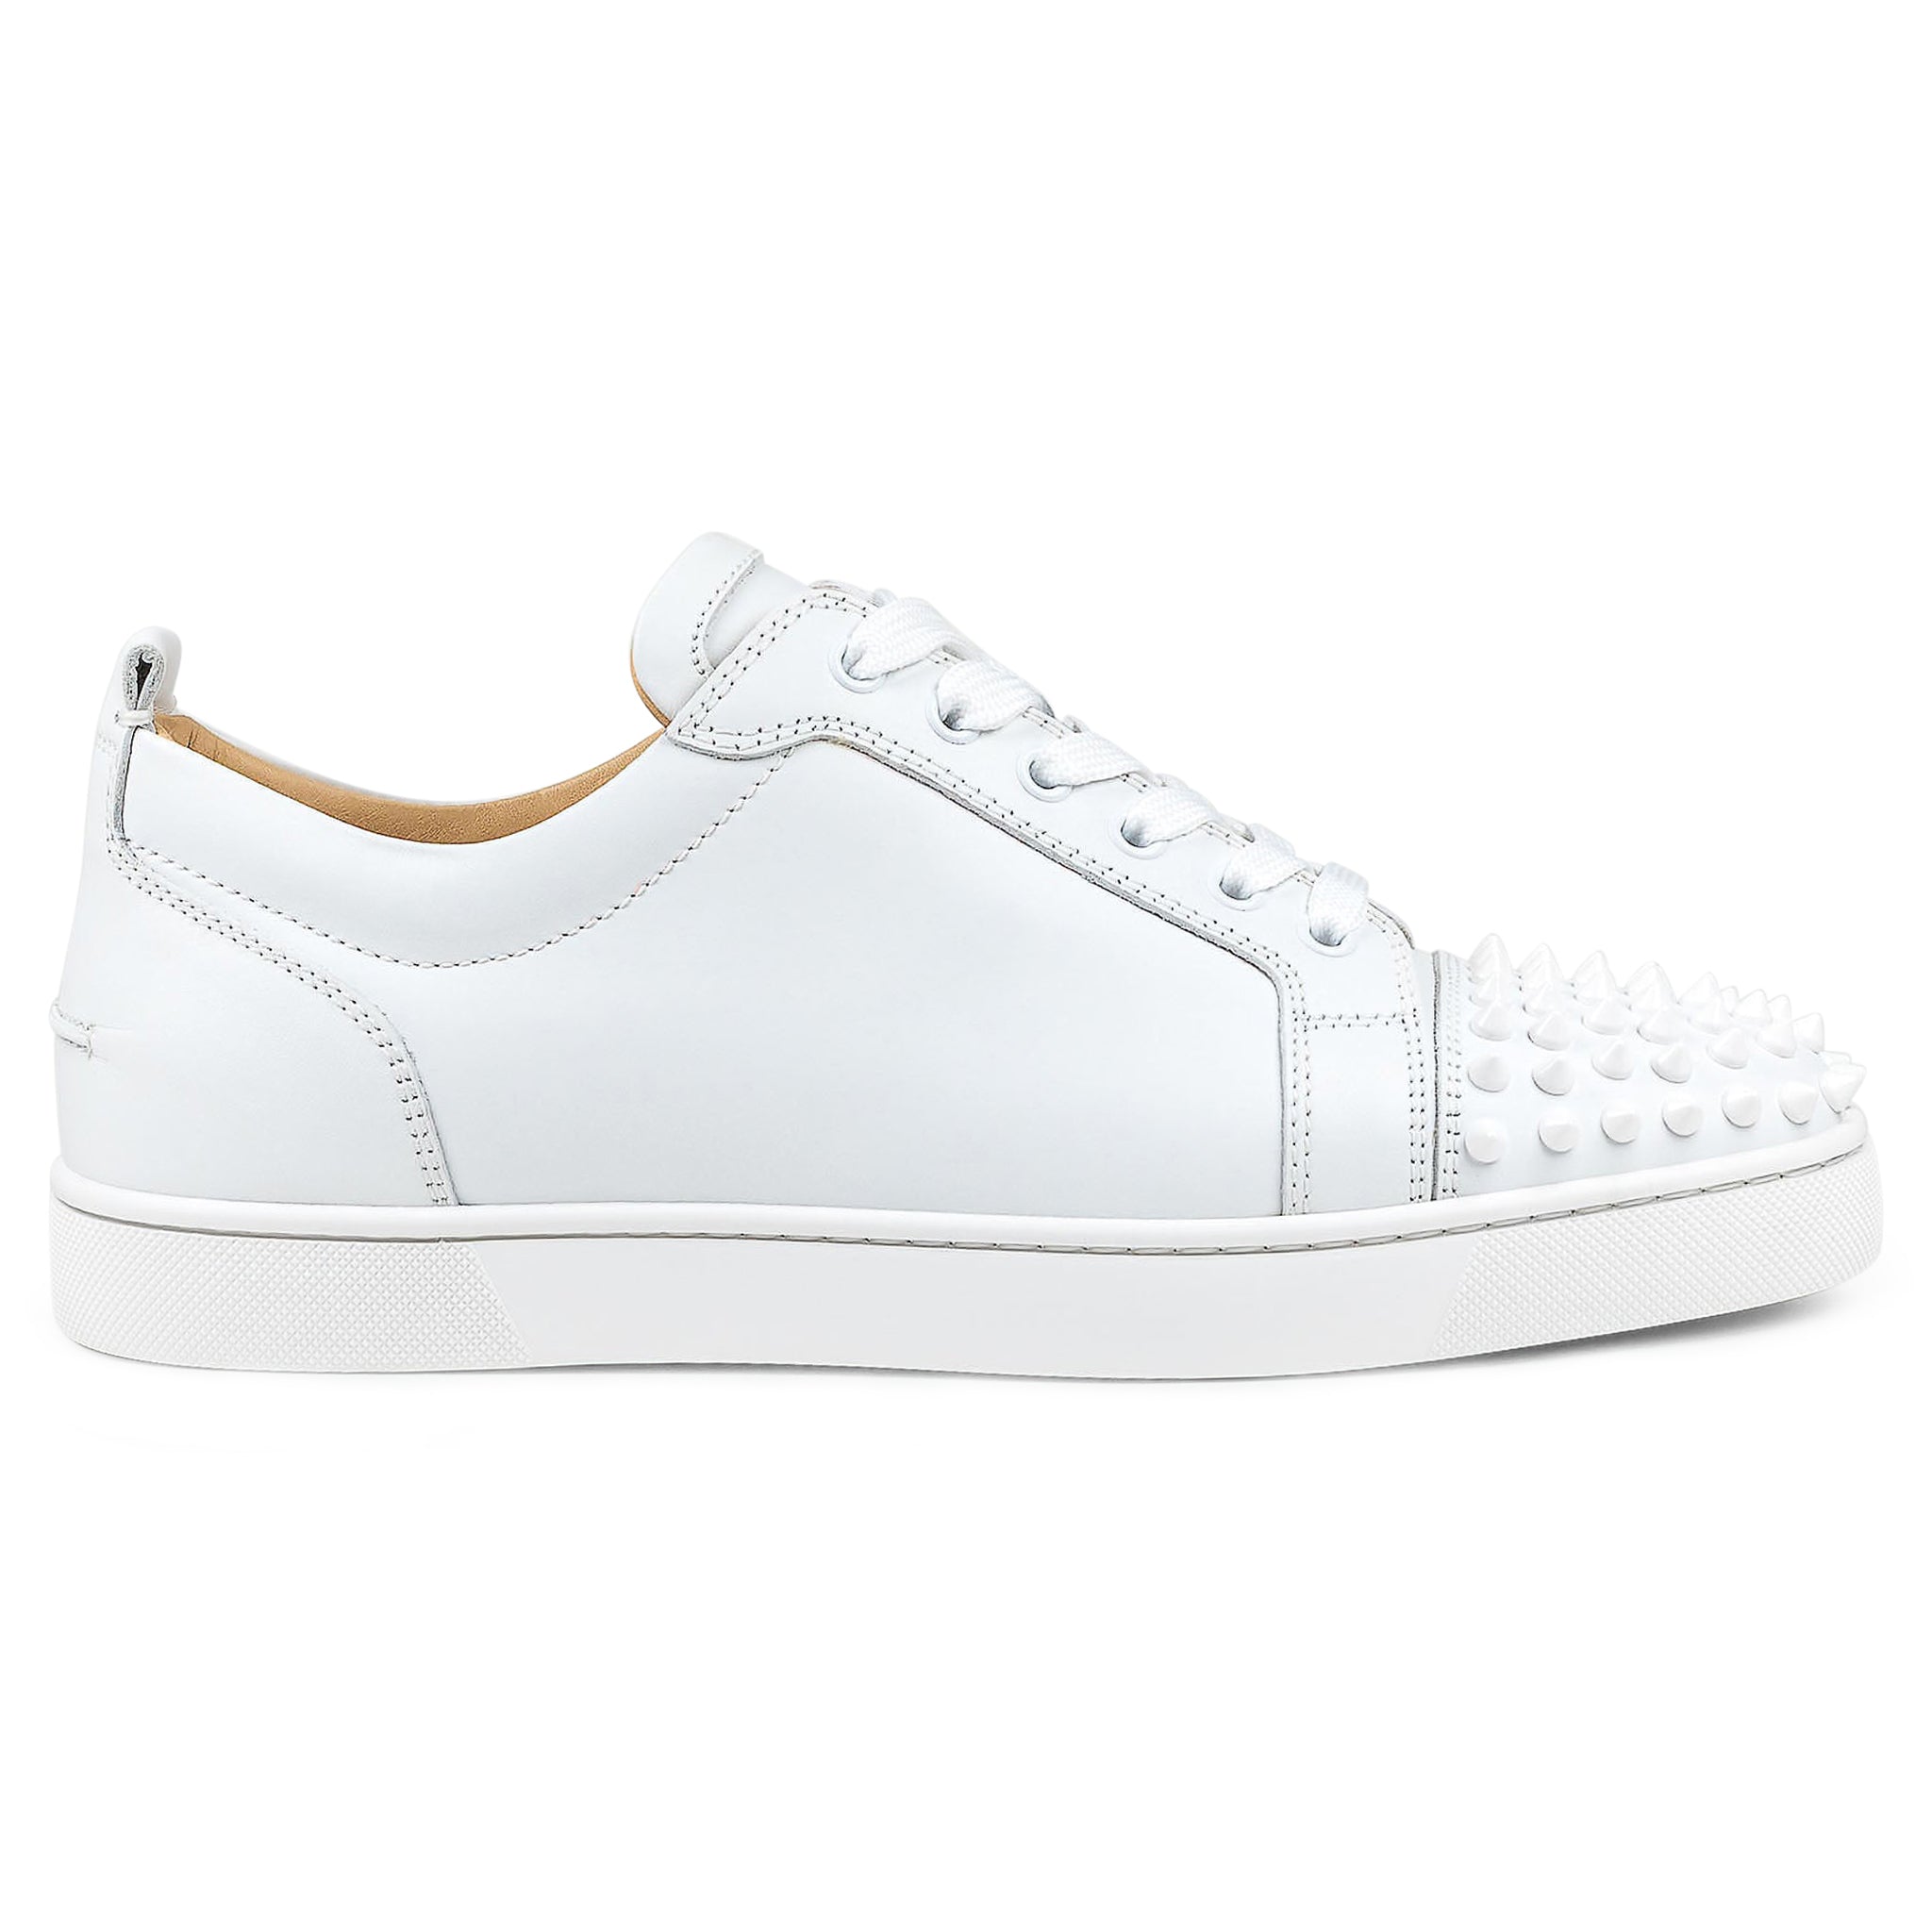 CHRISTIAN LOUBOUTIN: Louis Junior sneakers in studded leather - White